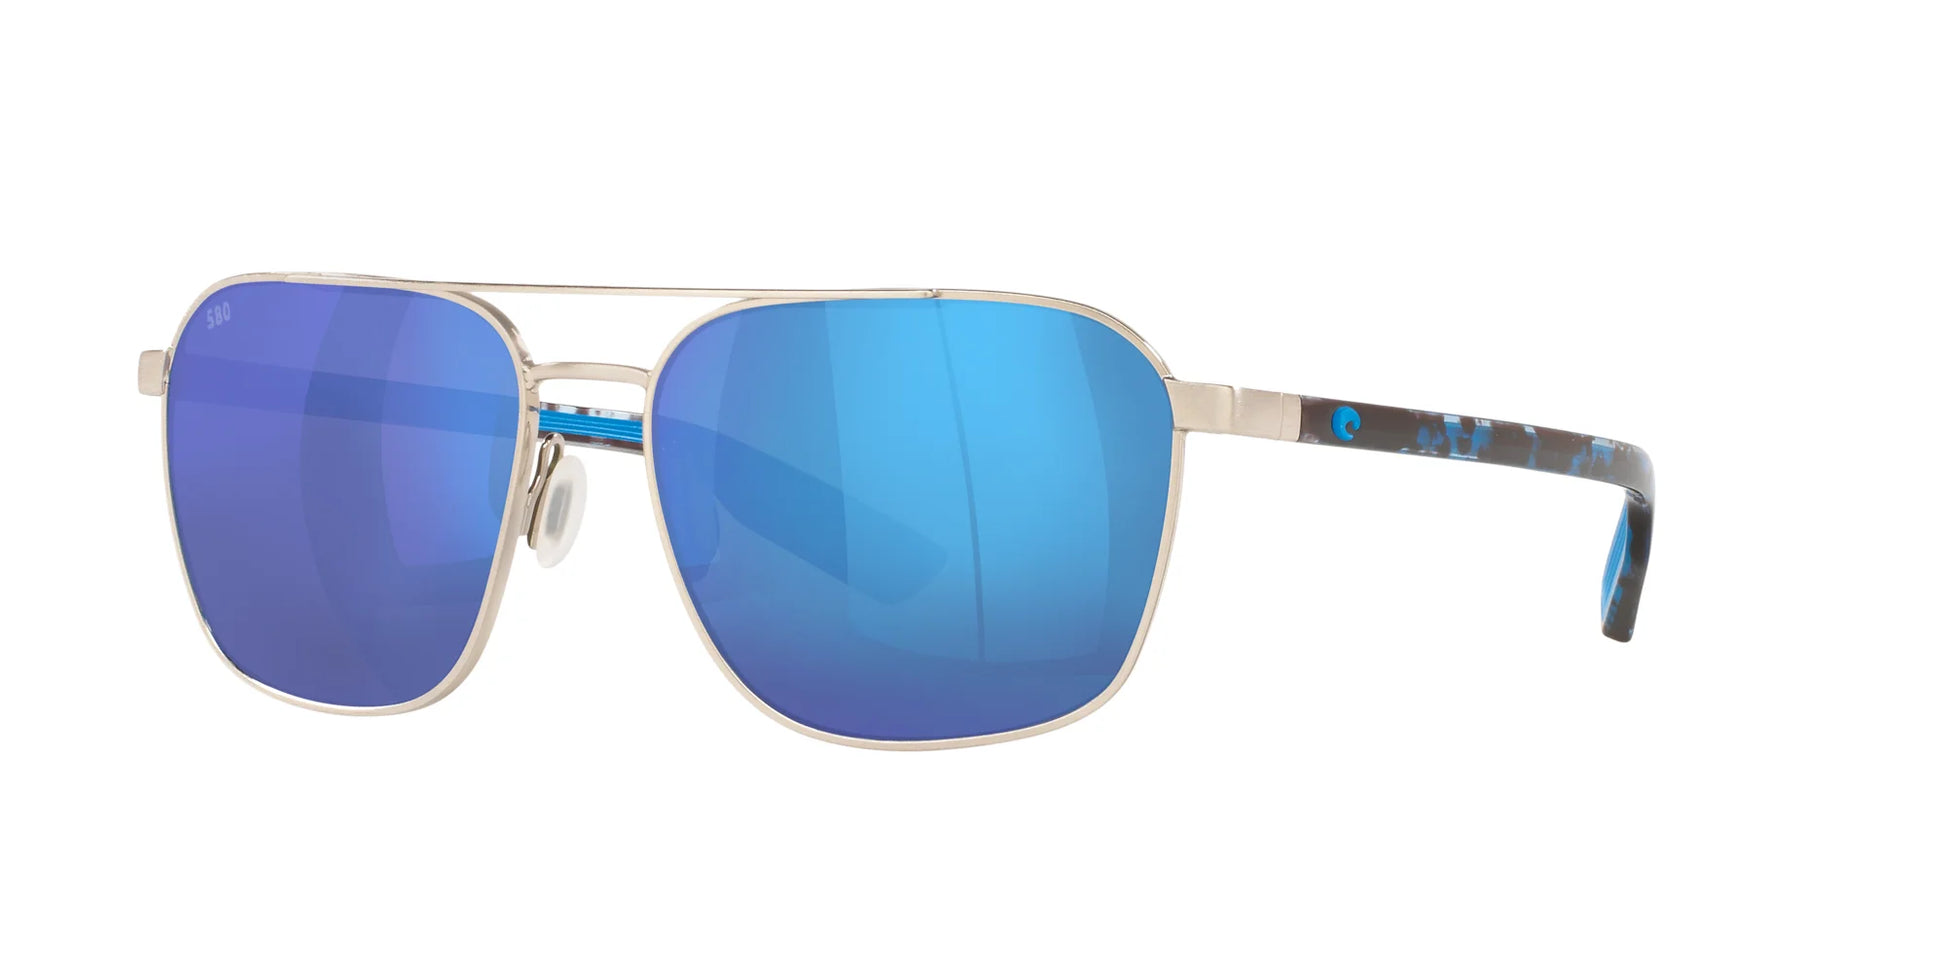 Costa WADER 6S4003 Sunglasses Brushed Silver / Blue Mirror